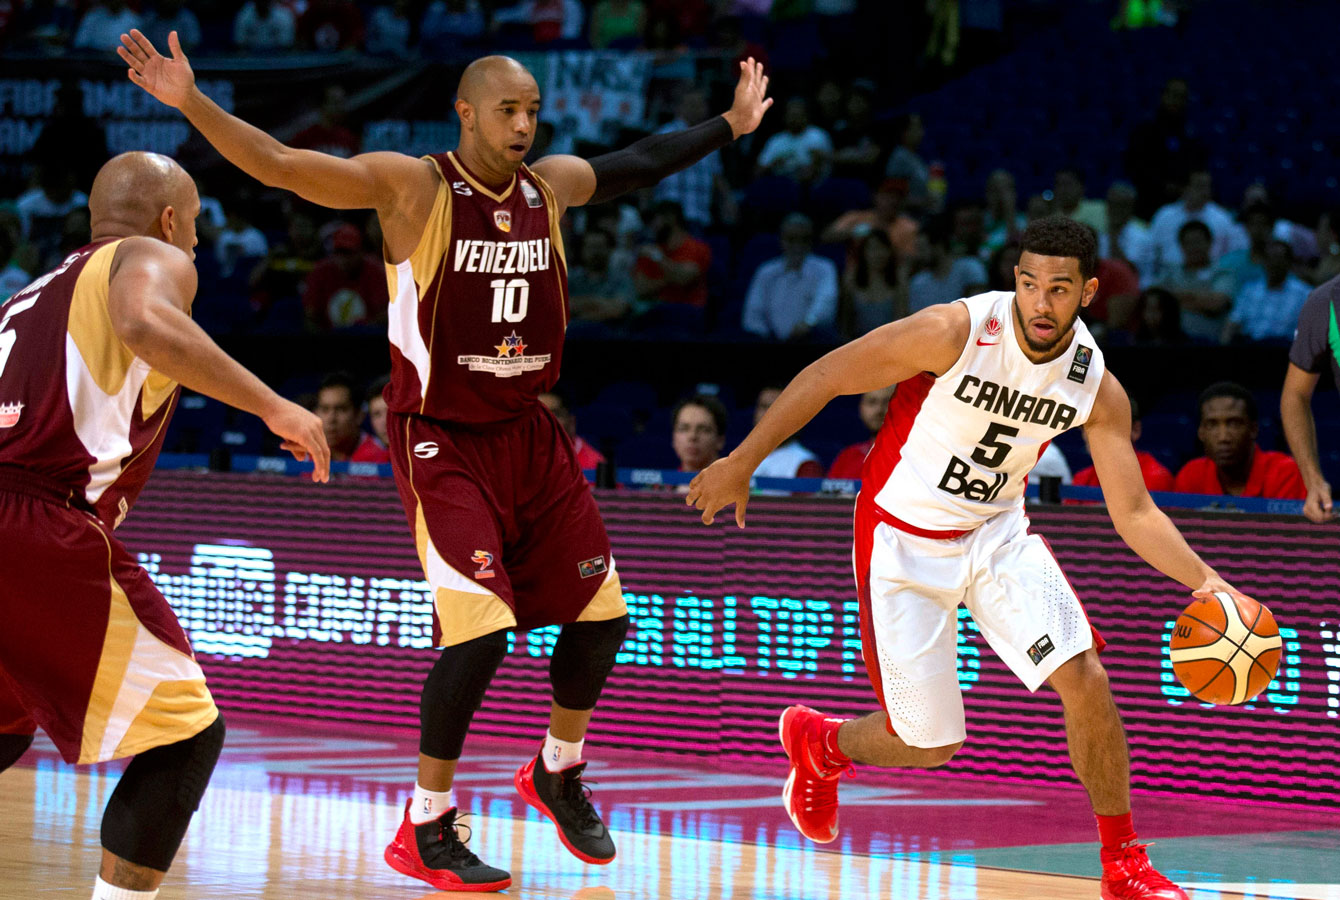 Cory Joseph had five points, four assists, and three rebounds against Venezuela.